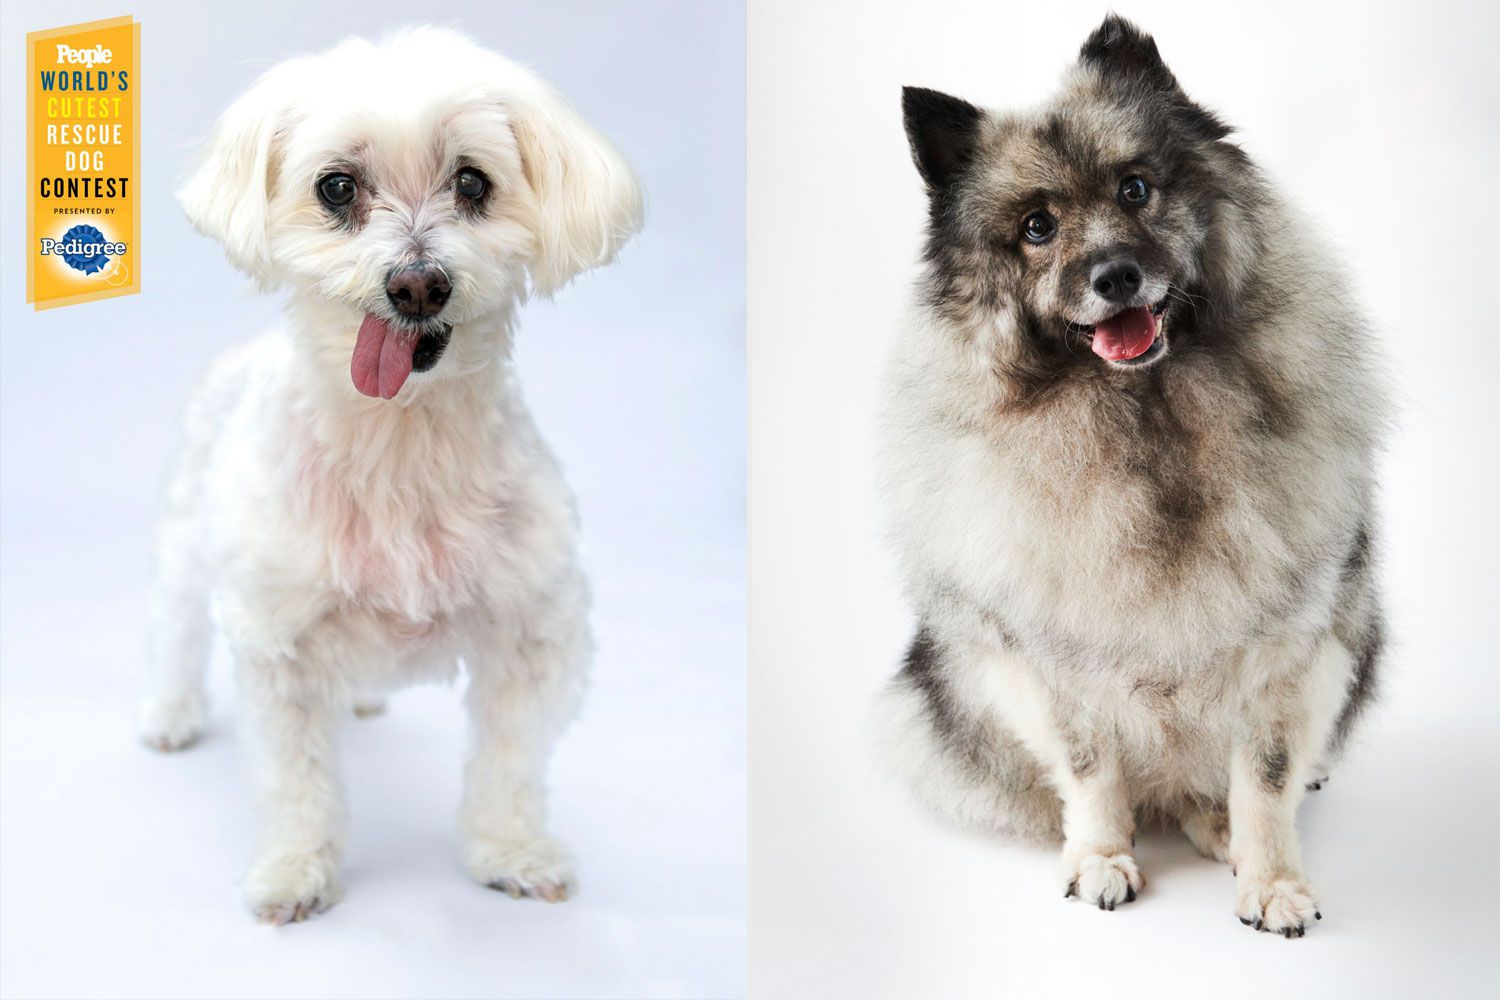 past cutest rescue dogs winners